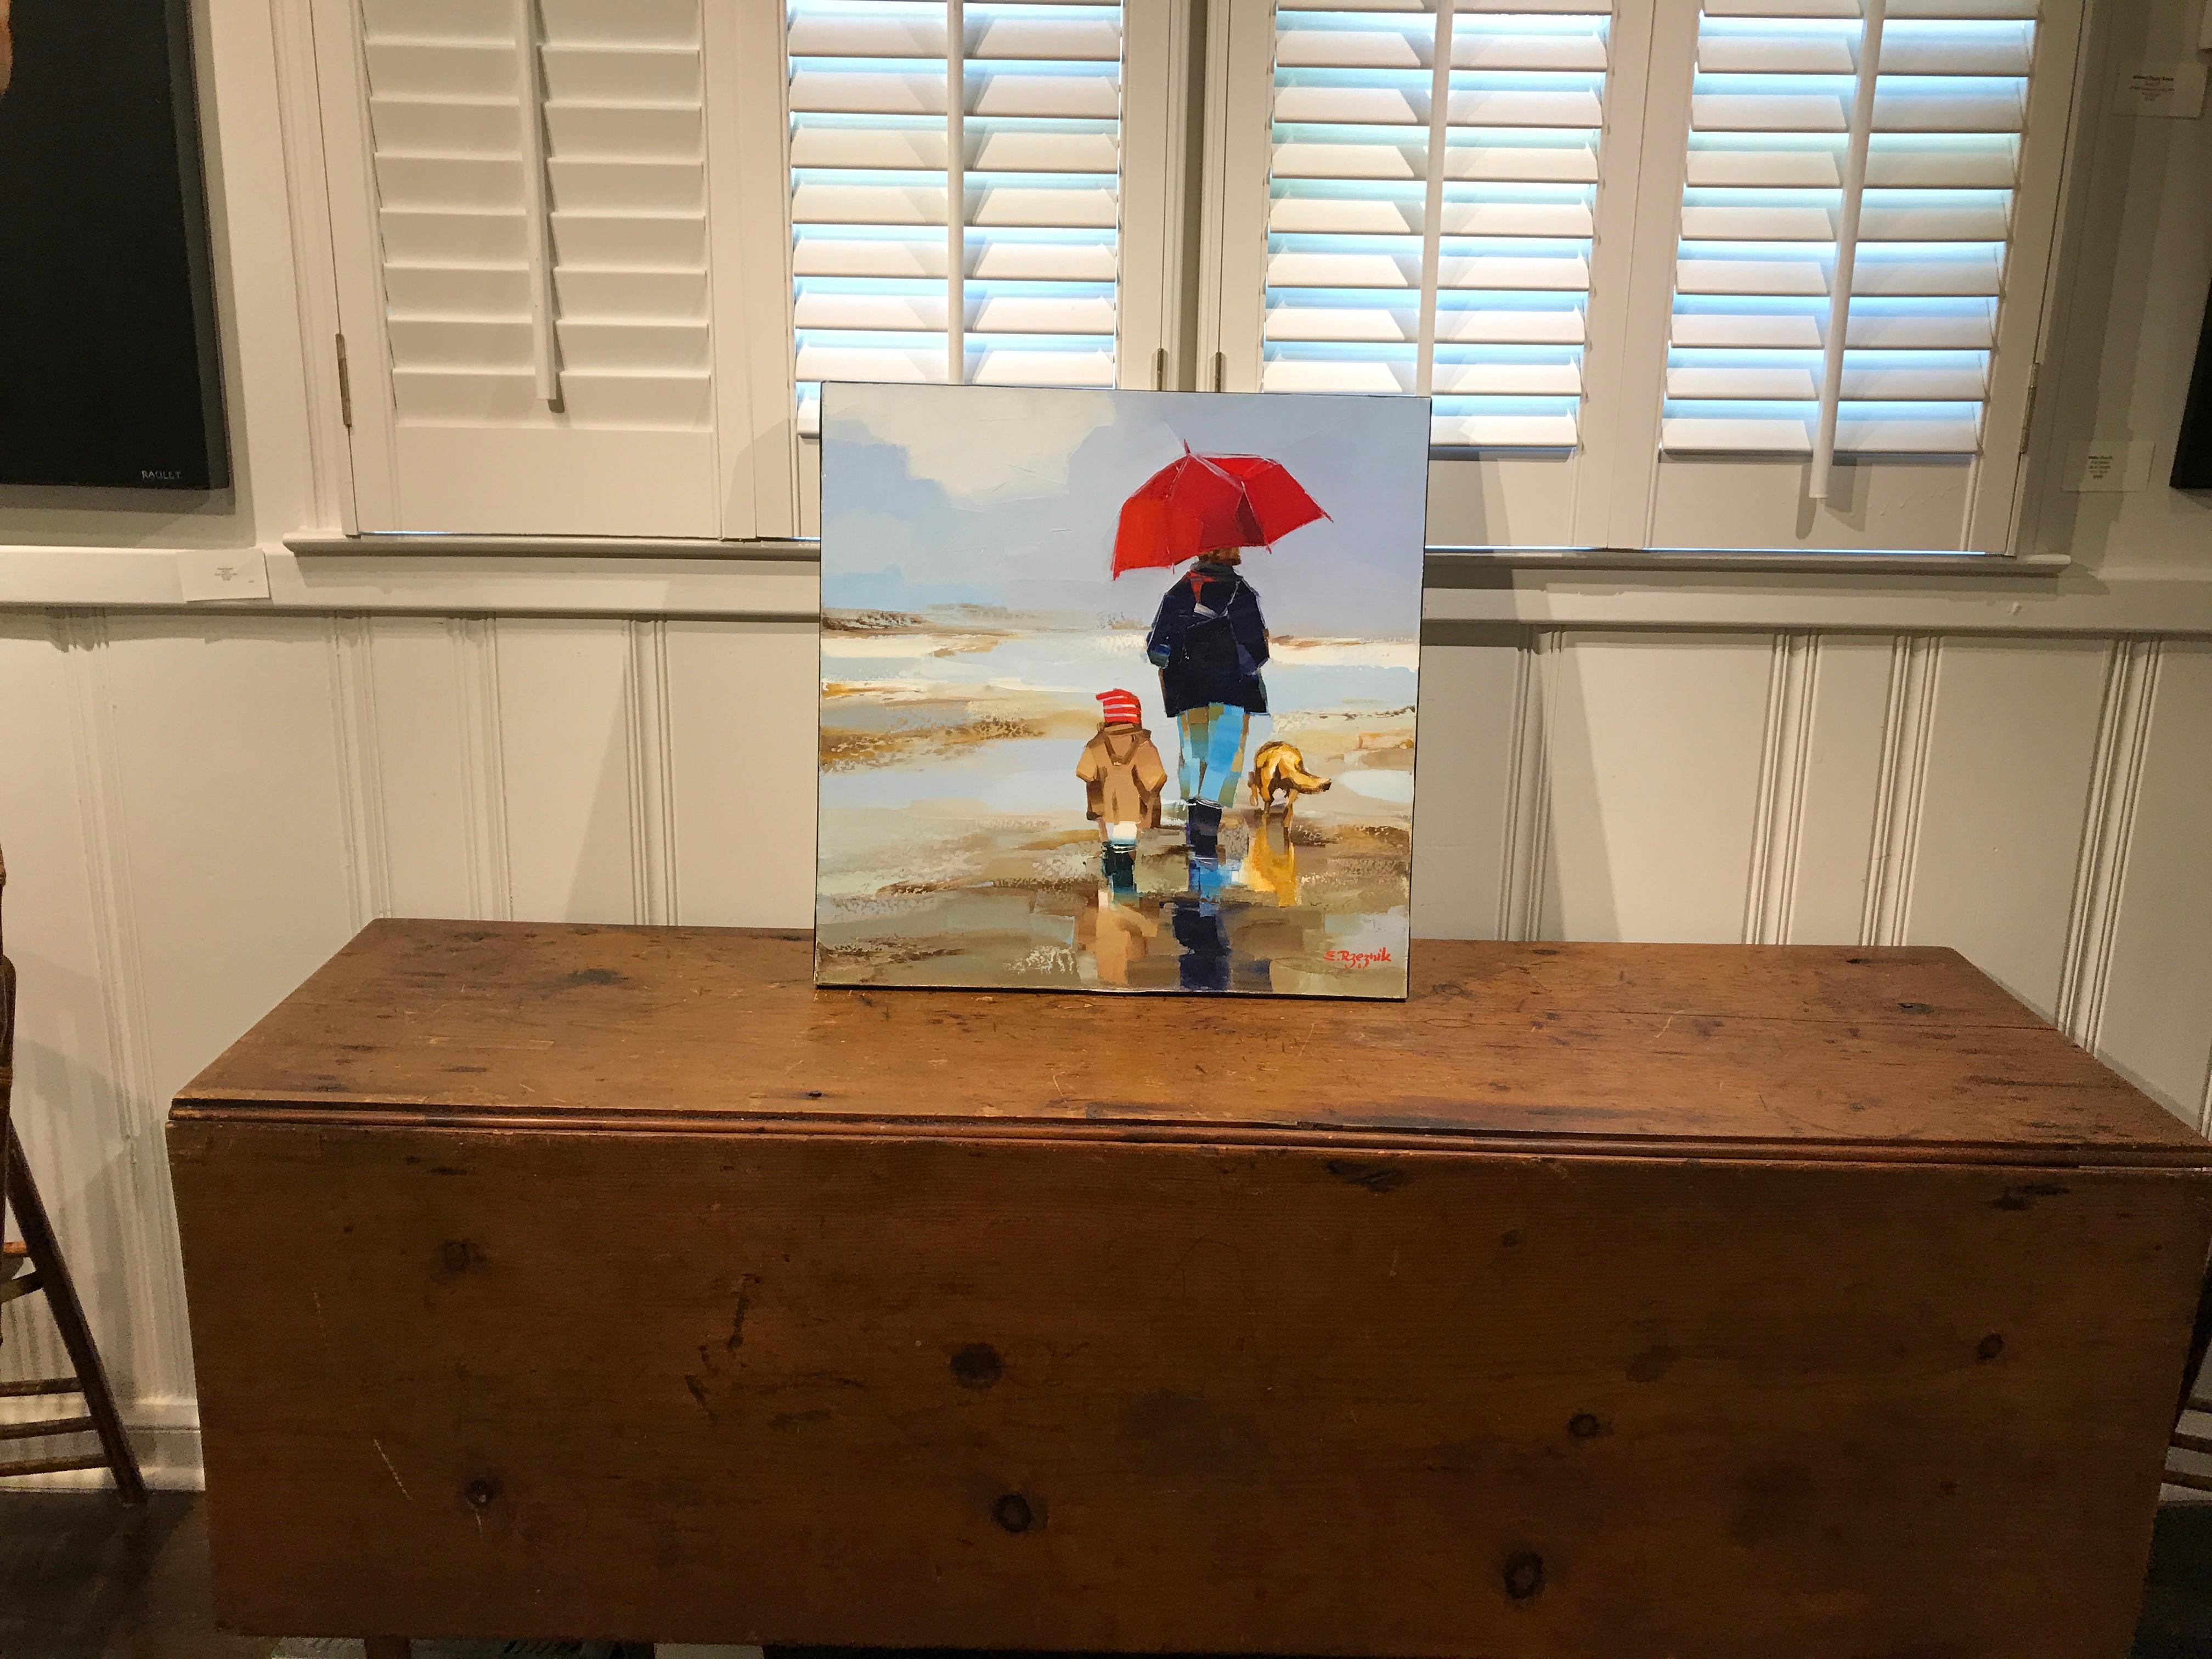 'Le Parapluie et le Chien' is a small size Impressionist beach painting of square format created by Polish-born artist Ewa Rzeznik in 2014. Featuring an exquisite scene set on a French beach, the painting draws its title from the dog, obediently